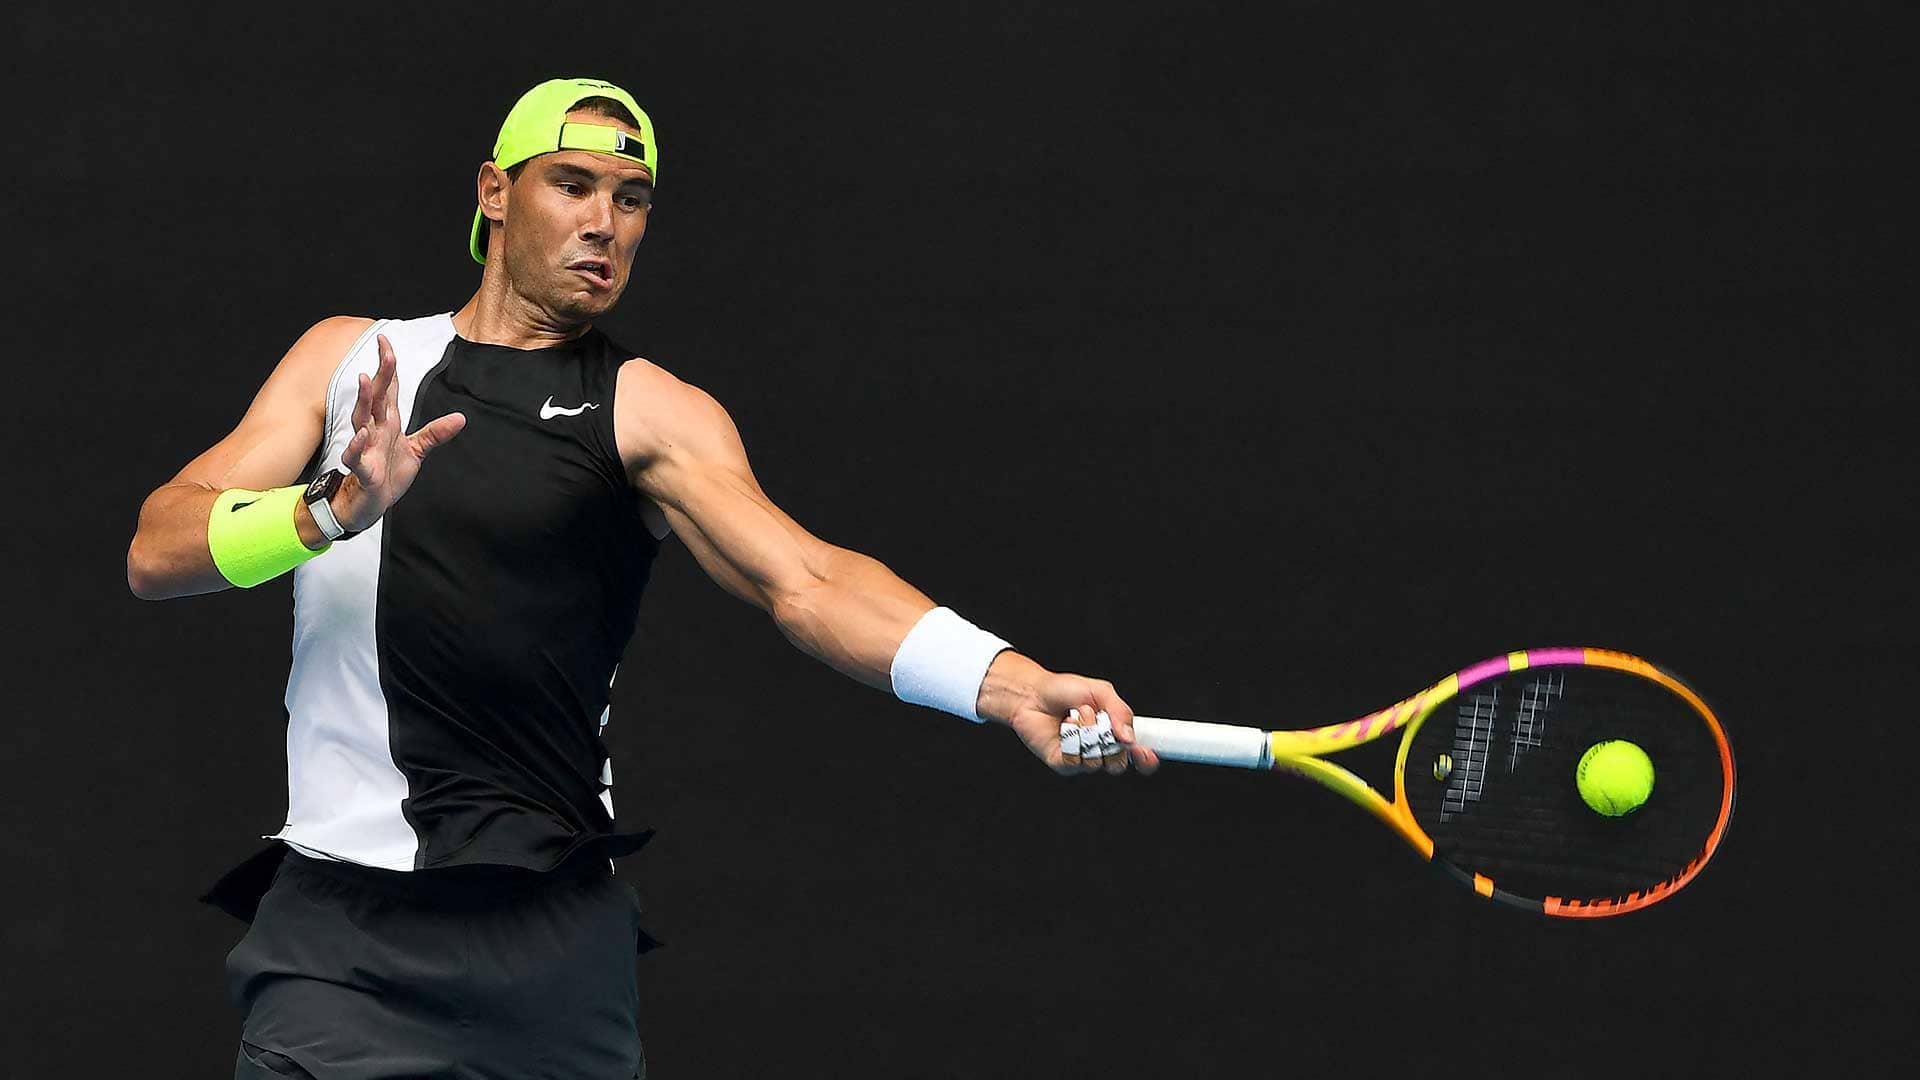 Rafael Nadal will play Jack Draper in the first round of the Australian Open.